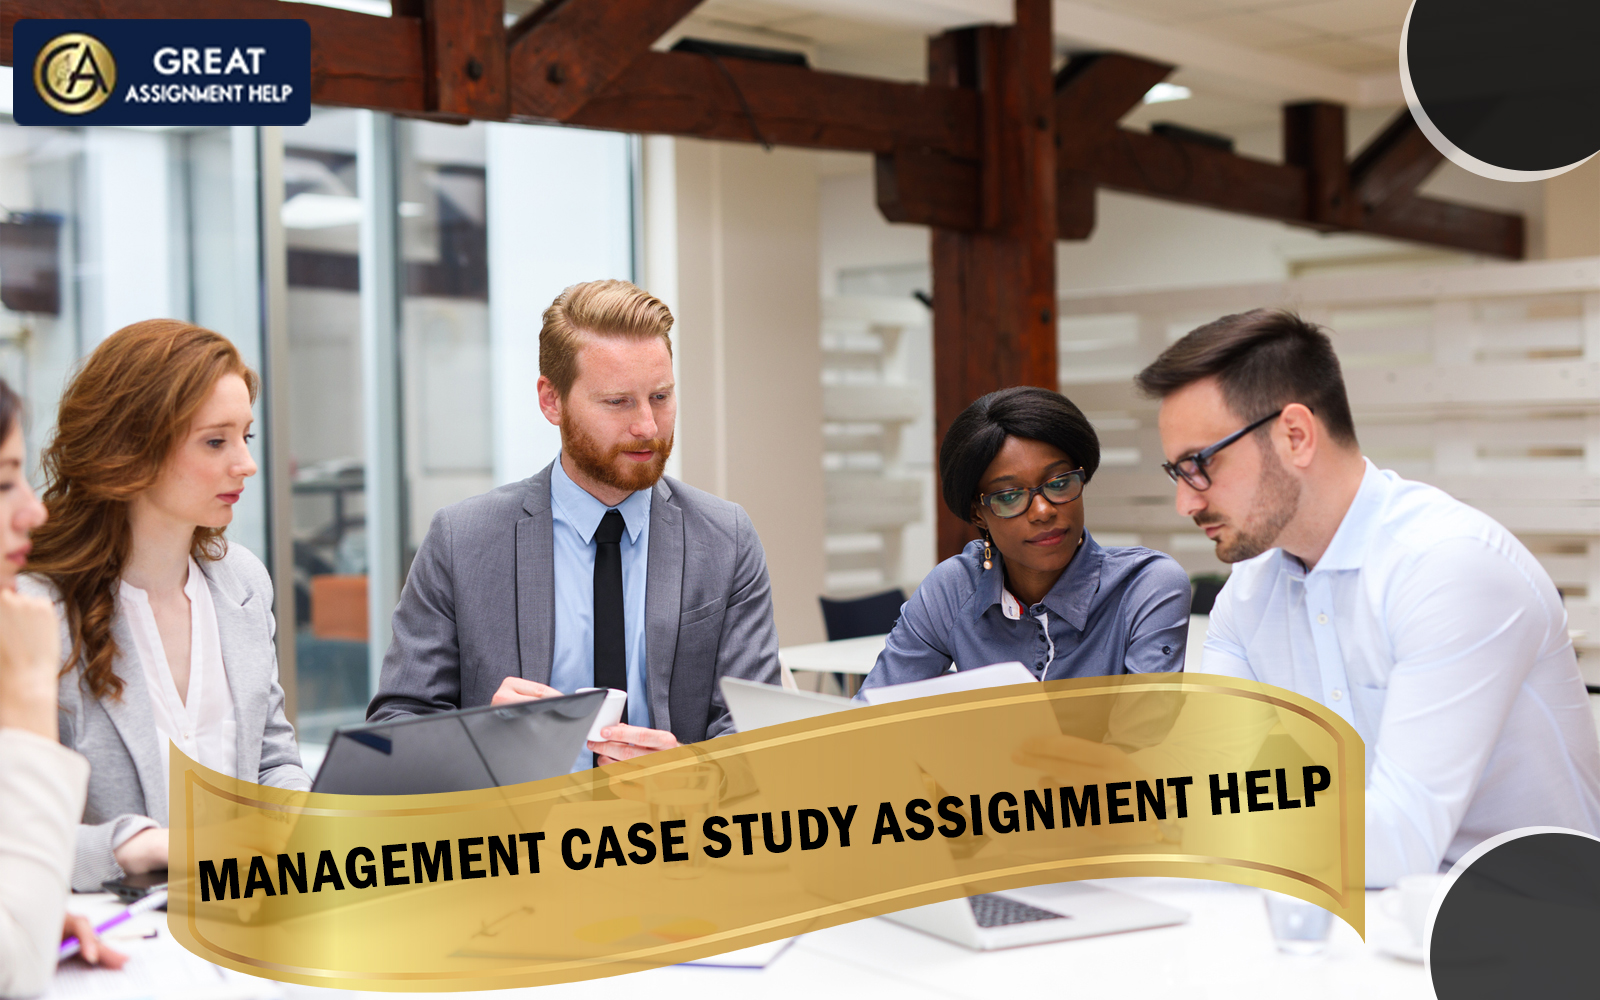 Get an excellent guide on Management Case Study Assignment Help in USA